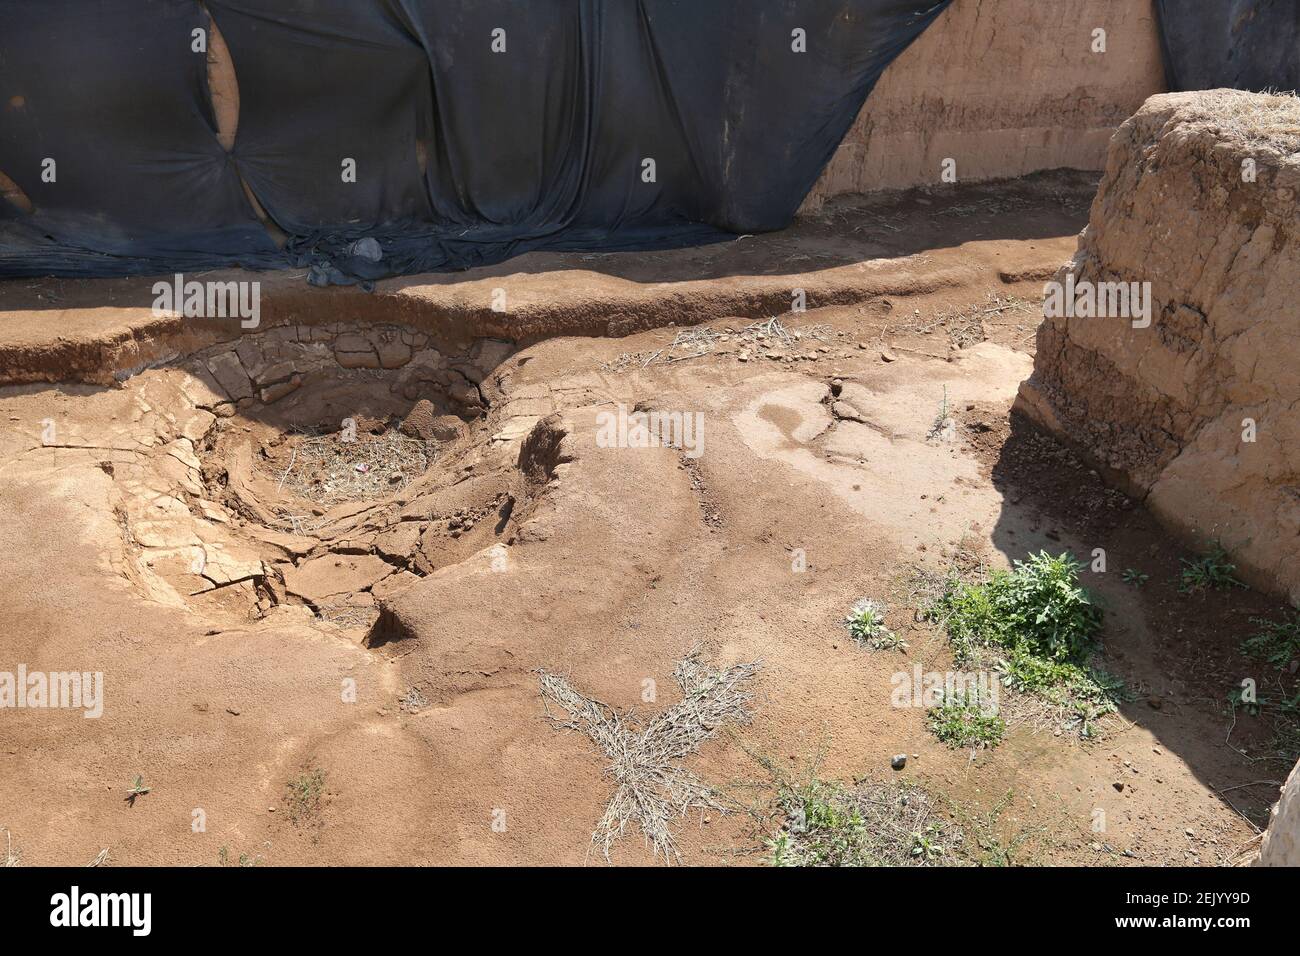 Henanï¼ŒCHINA-Photo taken on April 12, 2020 shows the xindan archaeological excavation site in bozhuang town, beiguan district, anyang city, henan province. Duan shulin, chief editor of the official office of the compilation of records in baizhuang town, said that the archaeological excavation was divided into three areas from north to south along the zhonghua road, namely, A, B and C. In the blue enclosure, some have started backfilling. Archaeological evidence shows that xindian site in anyang, henan province is the largest copper casting site in the late shang dynasty. In the area of 4000 s Stock Photo